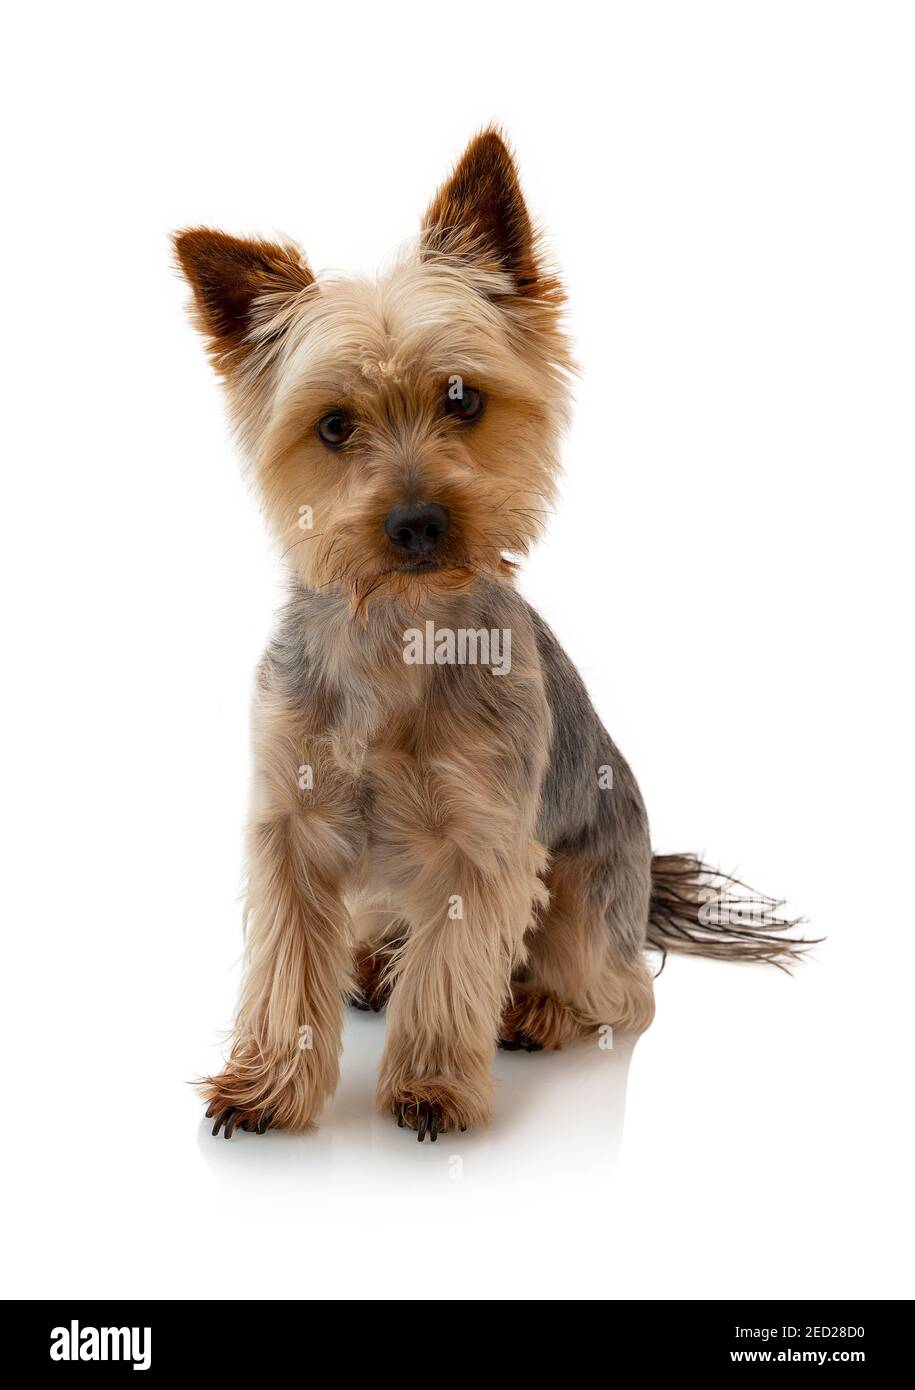 Adorable Australian Silky Terrier sitting, staring and waiting for the command isolated on white background with shadow reflection. Cute obedient dog. Stock Photo